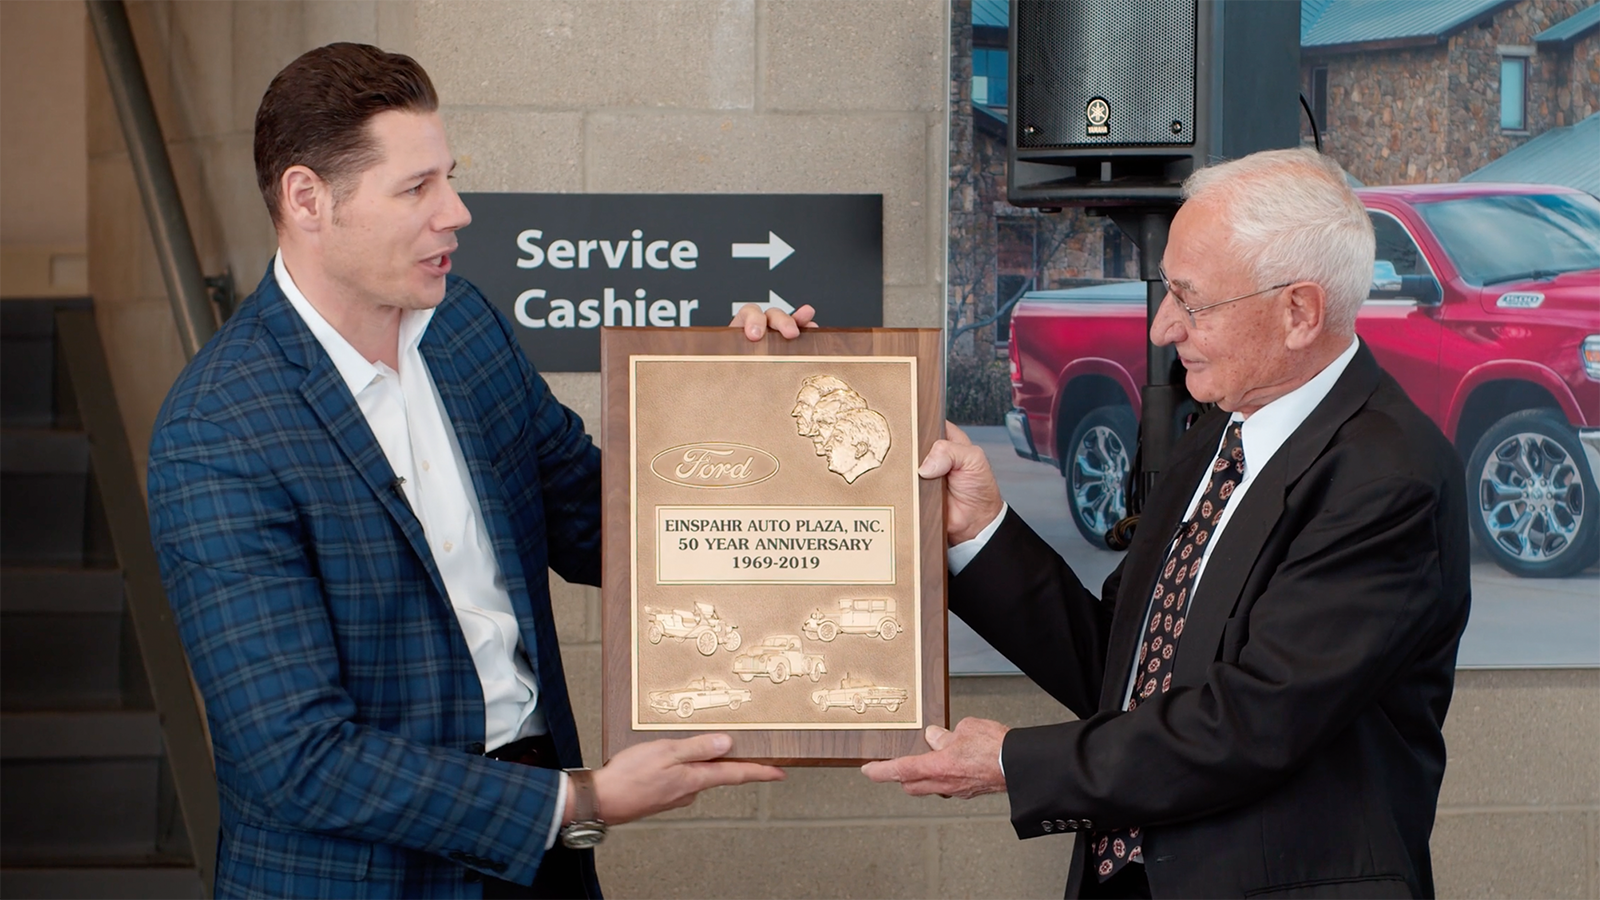 Ron receiving Ford plaque